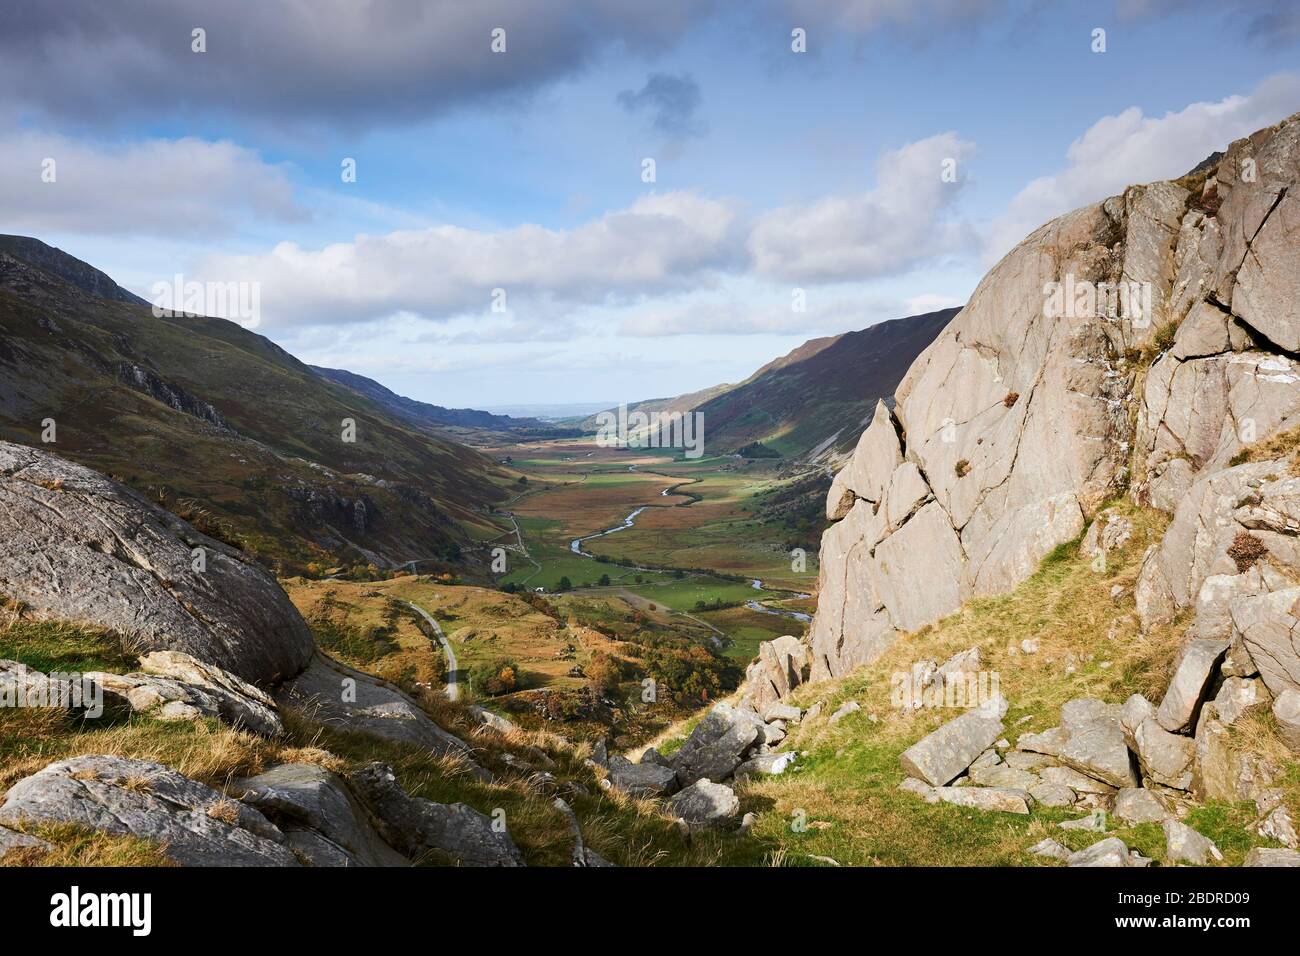 Landscapes in Wales, United Kingdom Stock Photo